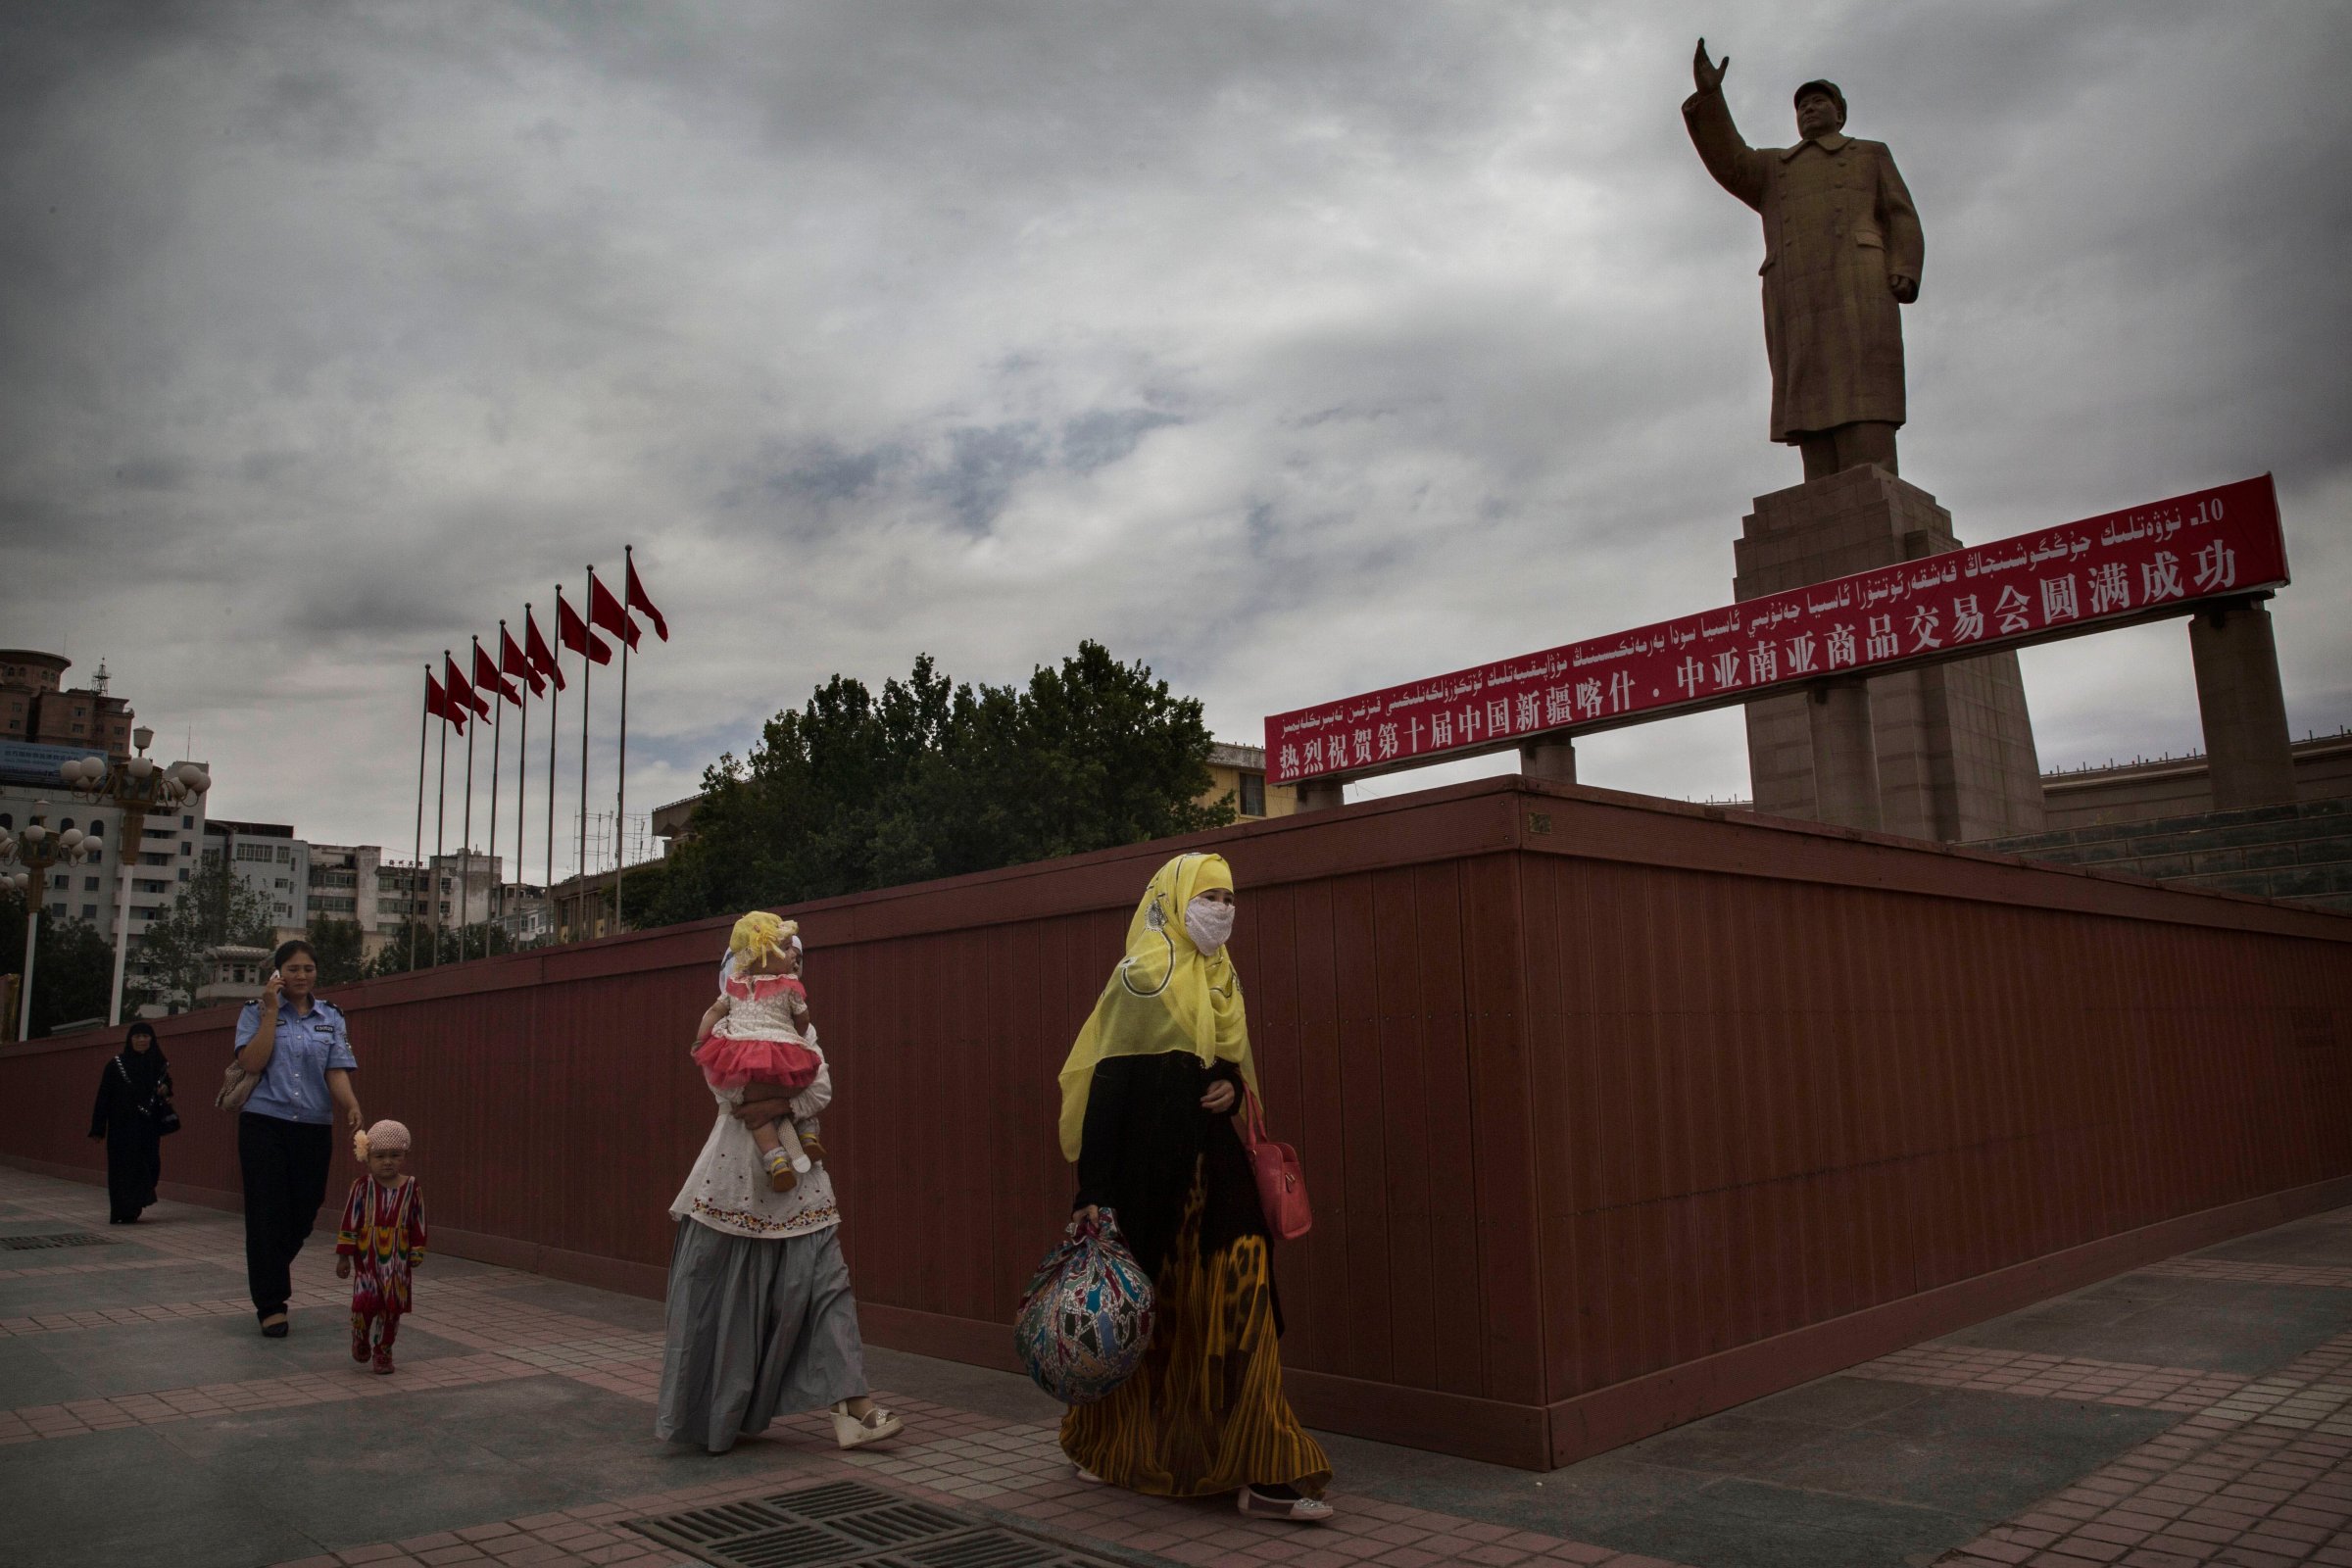 Uyghur Life Persists in Kashgar Amid Growing Tension in Restive Xinjiang Province